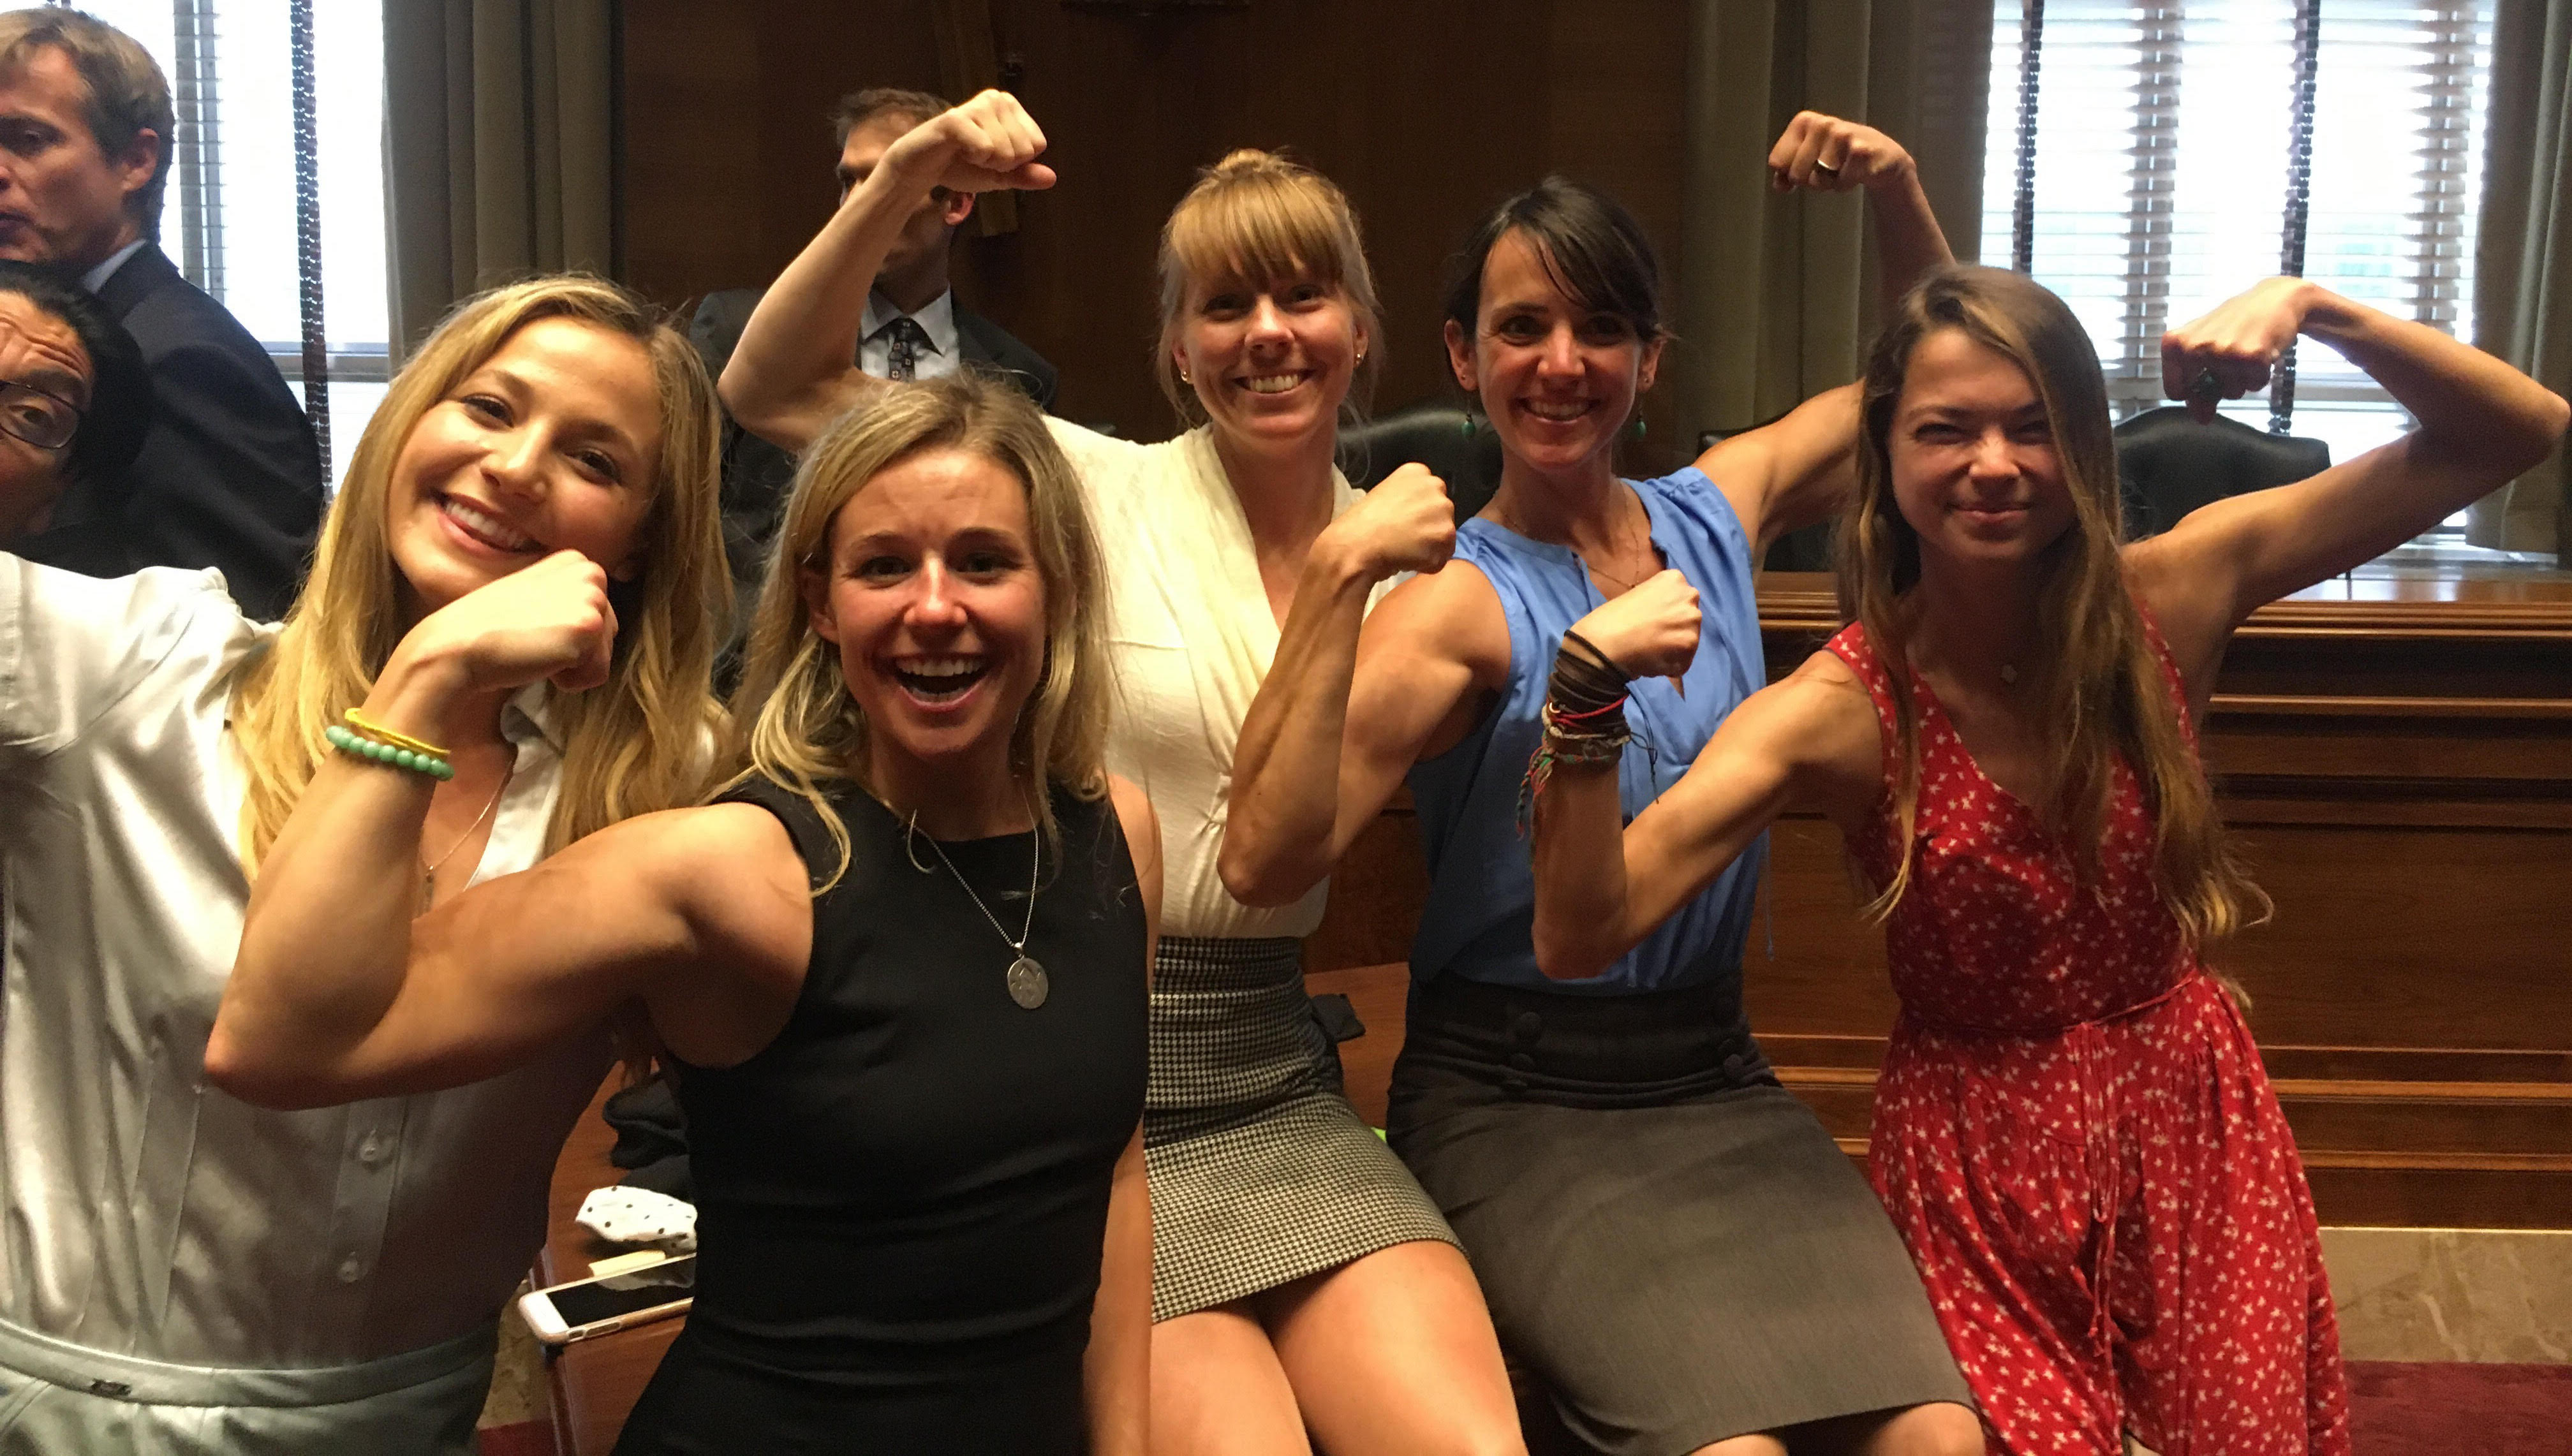 Quinn was also part of a delegation of 50 climbers who lobbied Congress in Washington, DC, last May on behalf of public lands and the environment. She's pictured here, second from right; the other women, from left to right, are Sasha DiGiulian, Caroline Gleich, Libby Sauter, and Katie Boue (far right). [Photo] Derek Franz